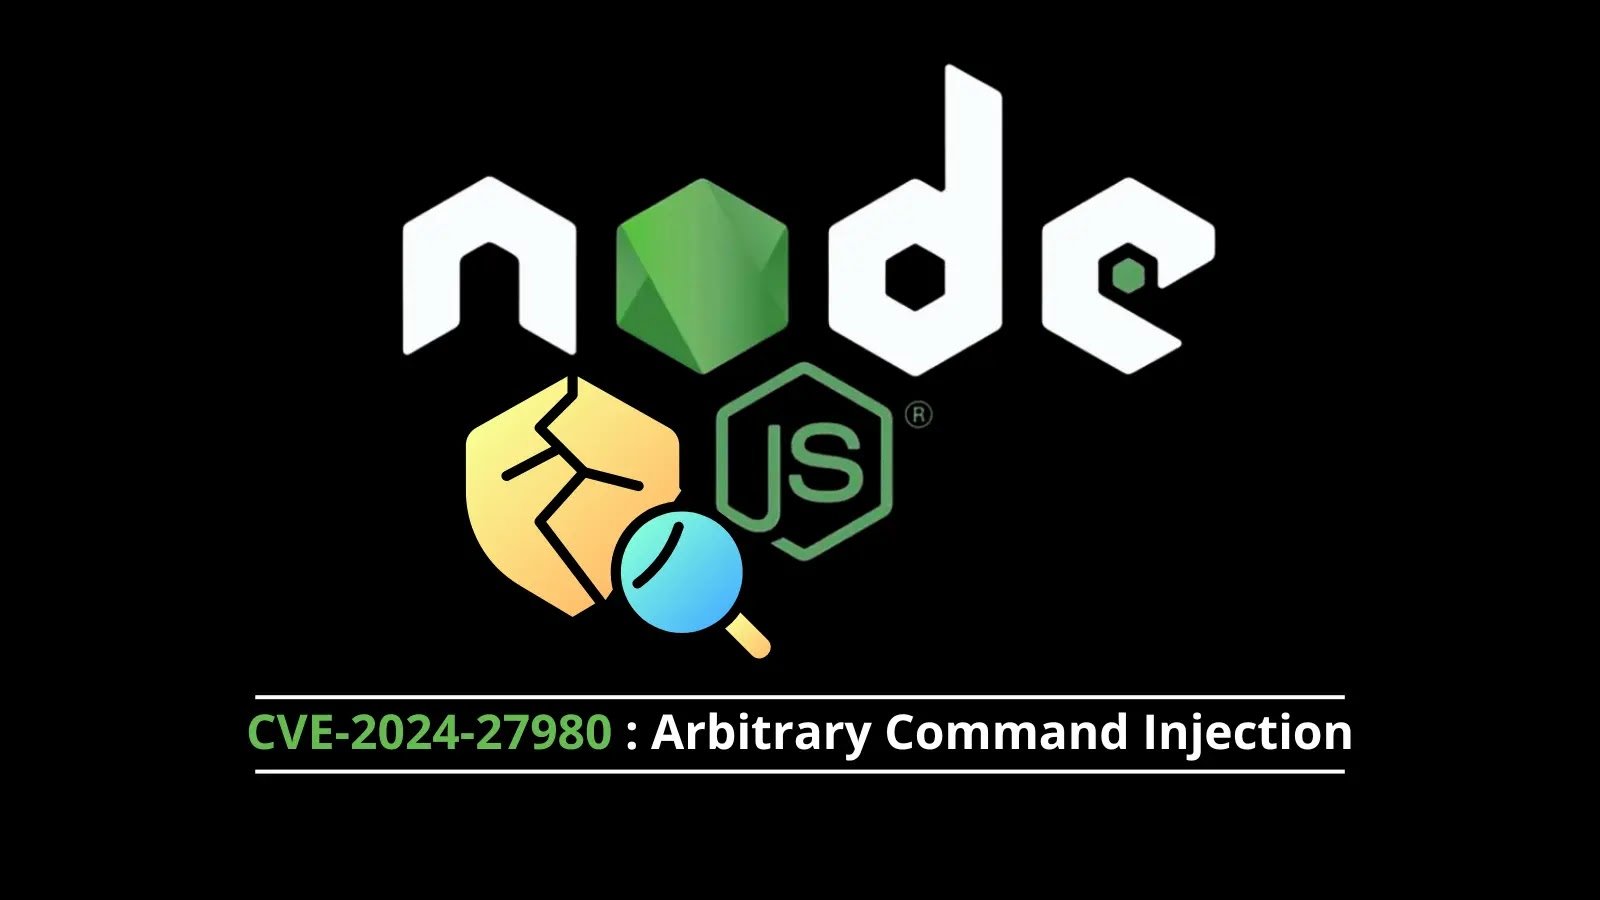 Critical Node.js Flaw Lets Attackers Execute Malicious Code on Windows Machines